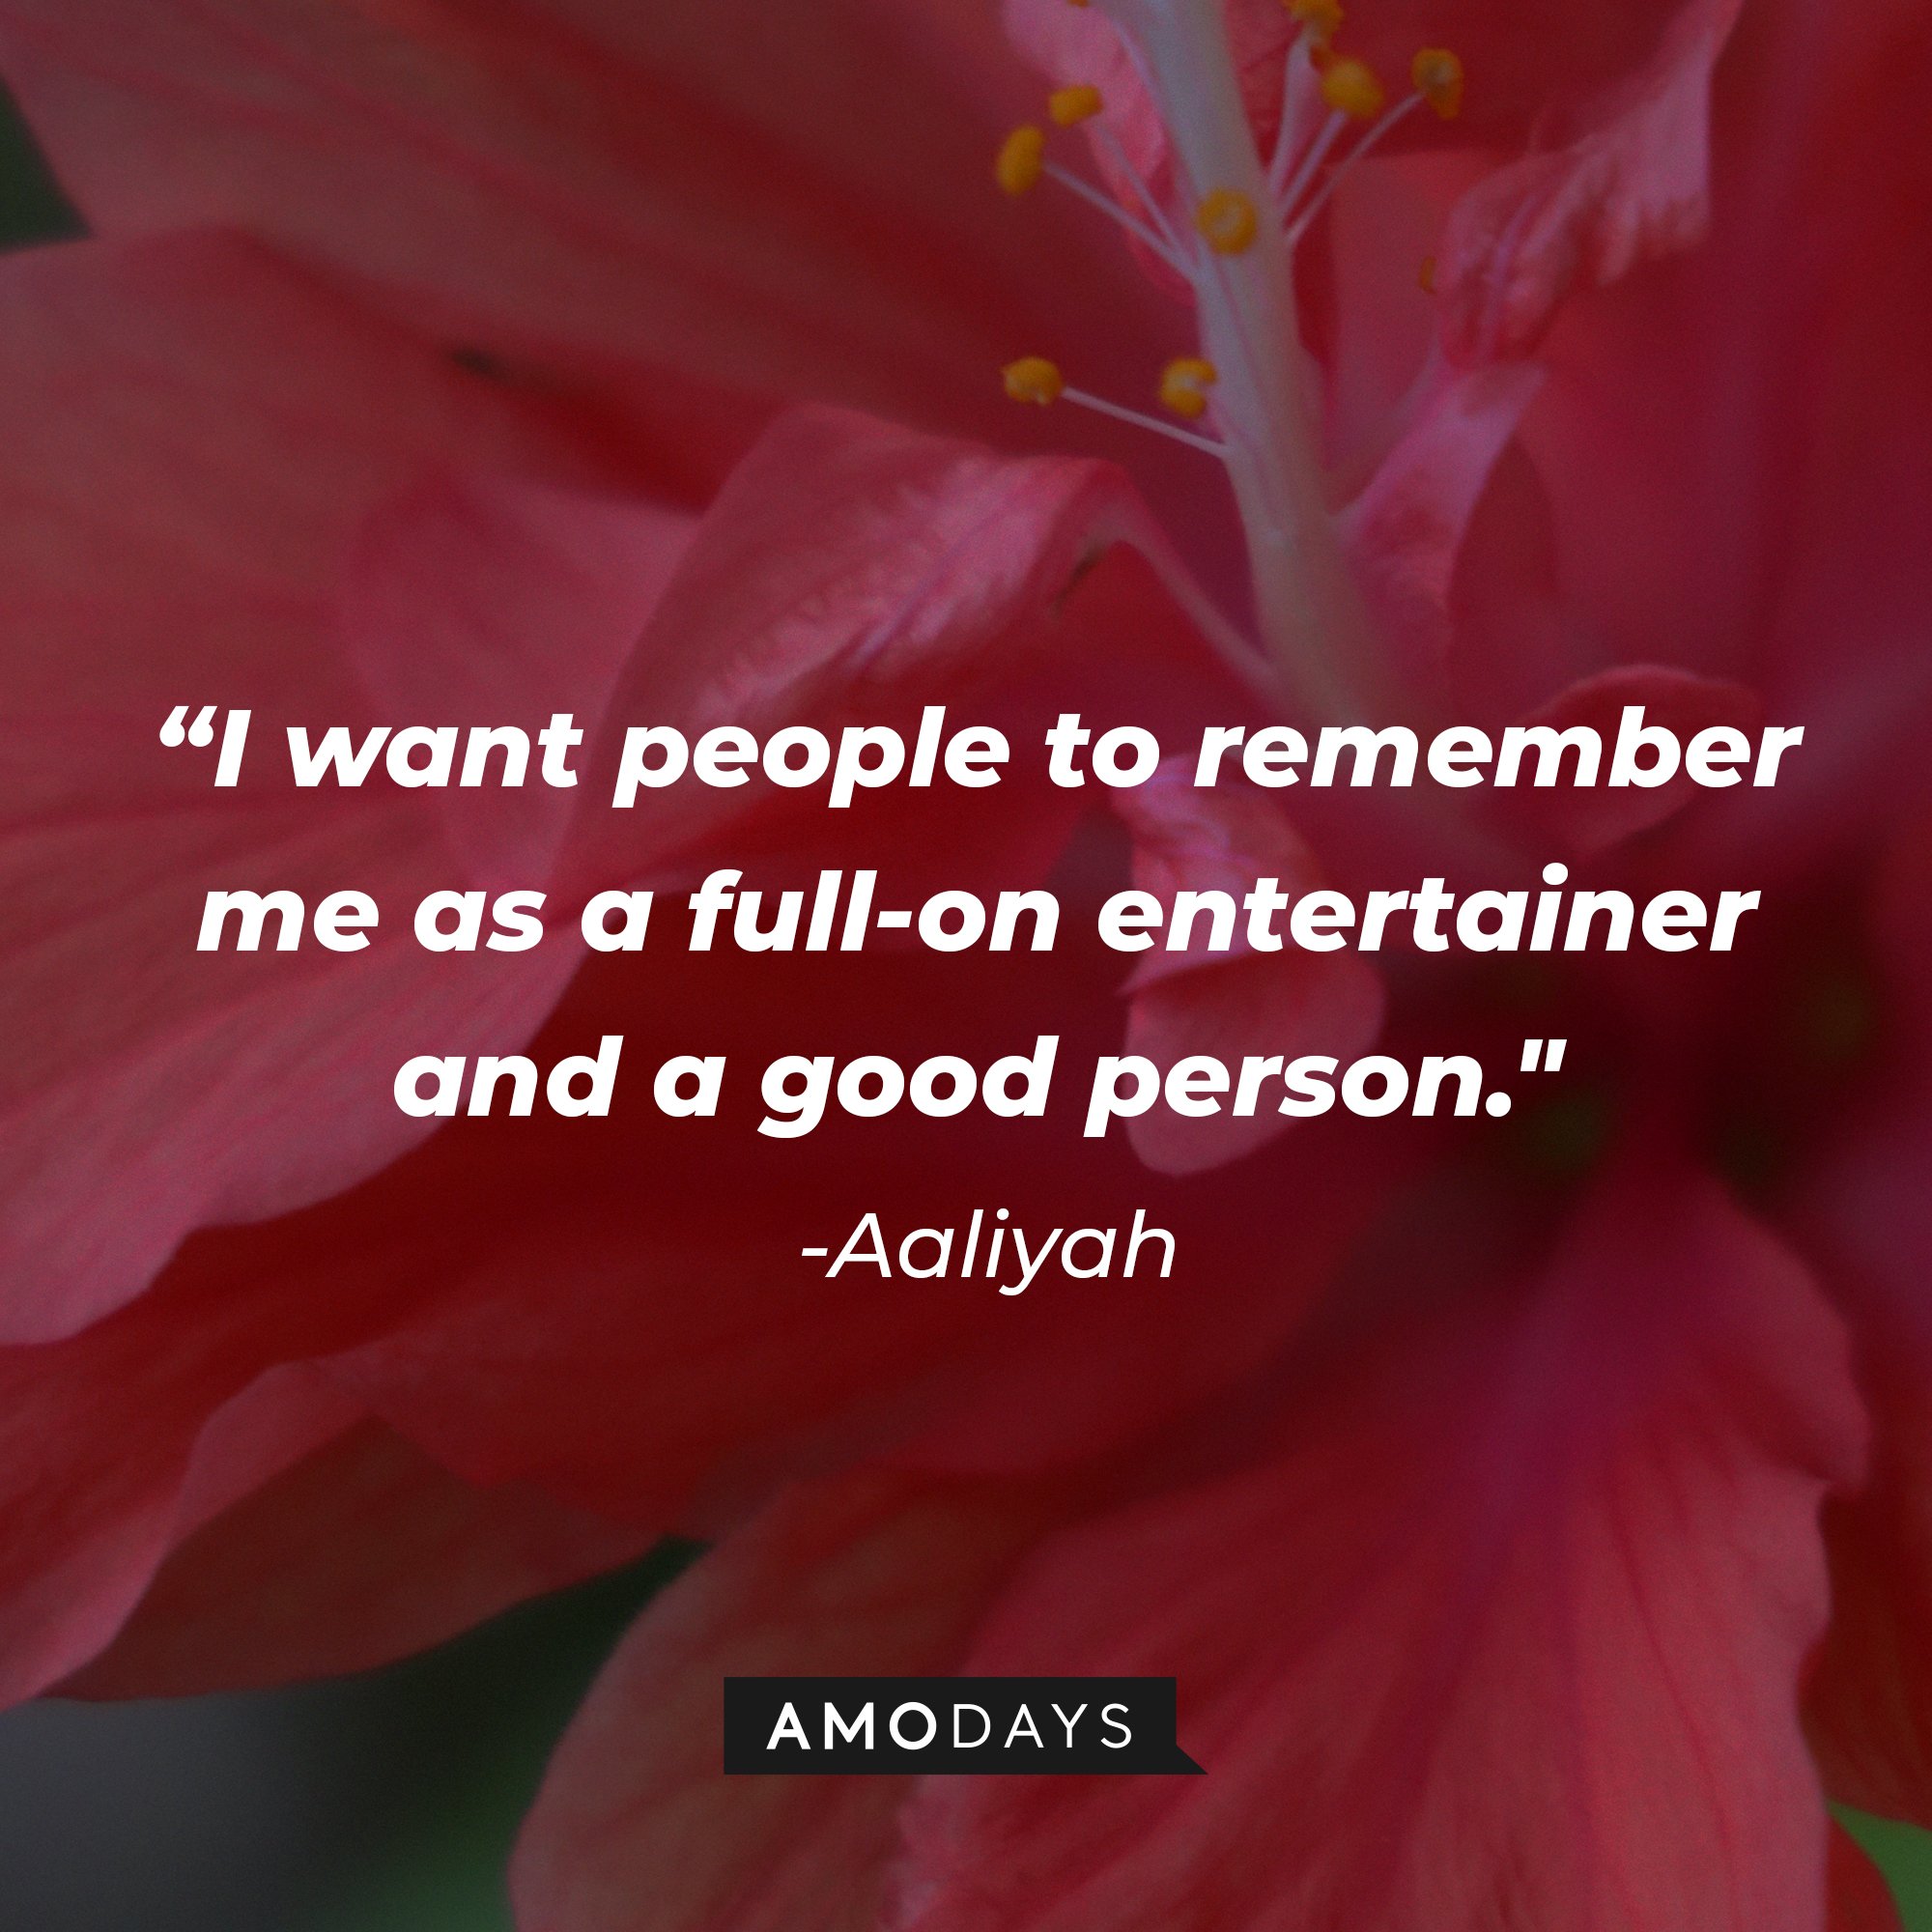 Aaliyah’s quote: “I want people to remember me as a full-on entertainer and a good person."  | Image: AmoDays